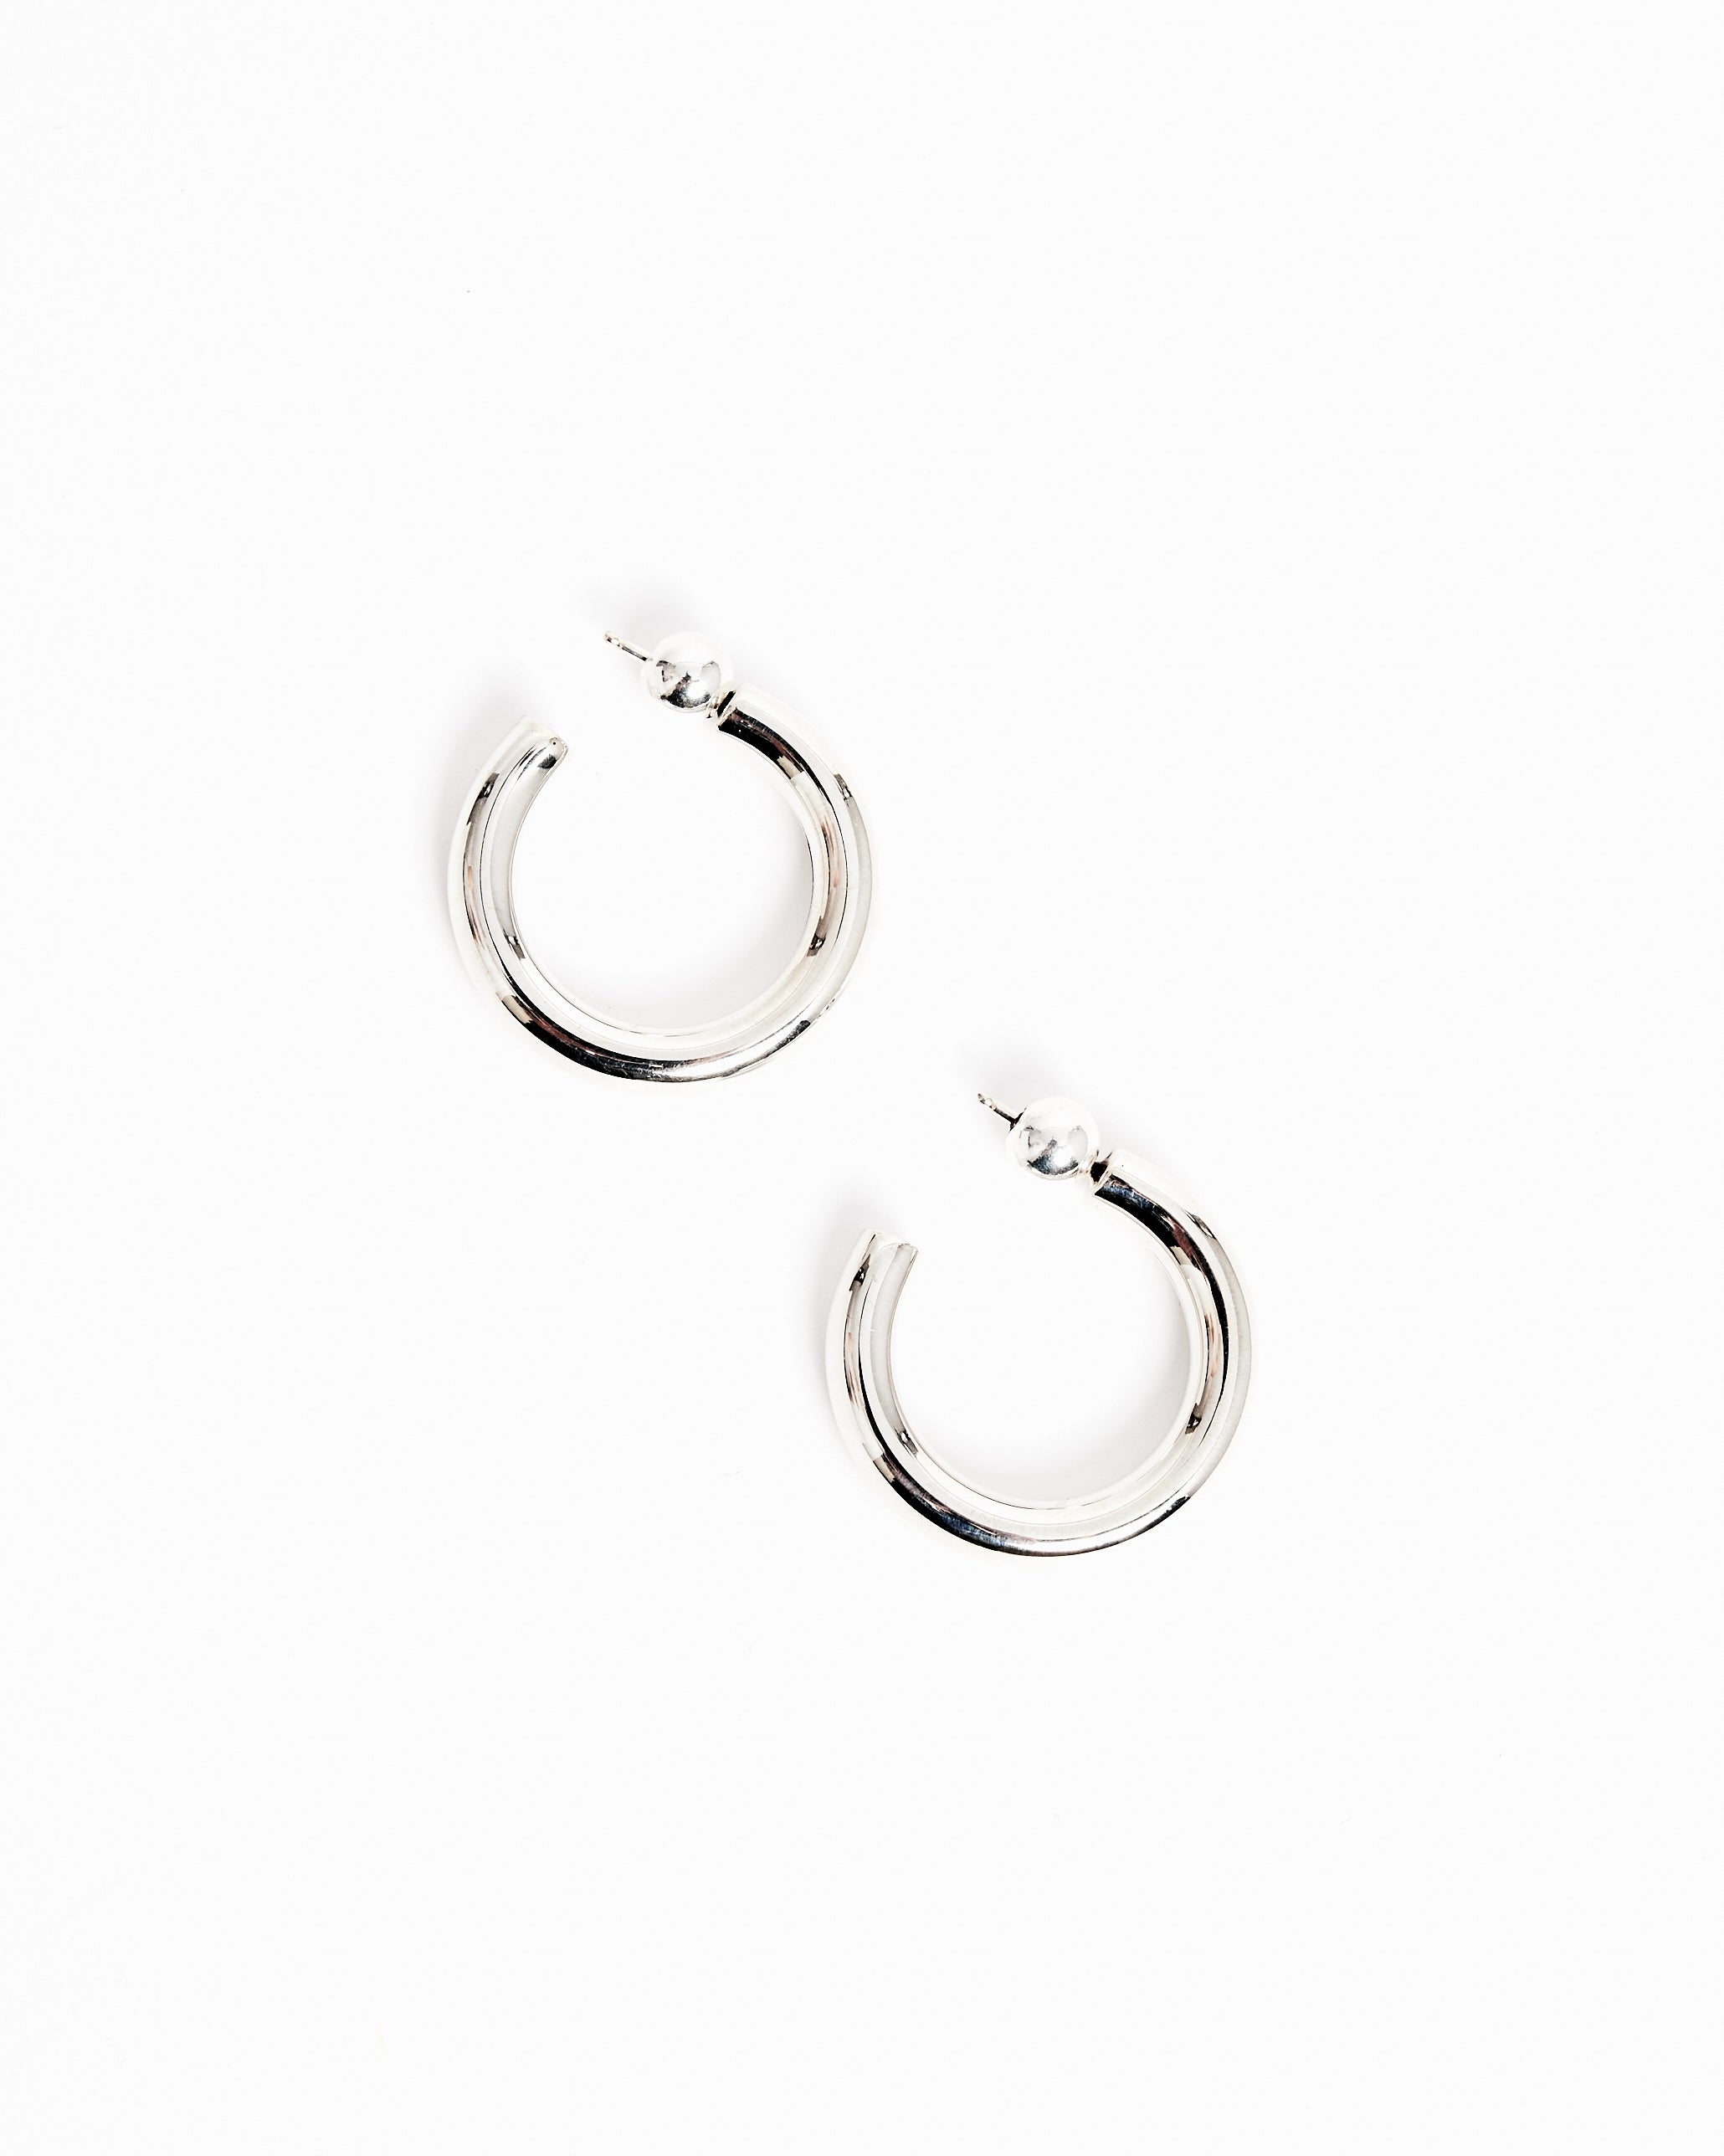 Small Everyday Hoops in Sterling Silver